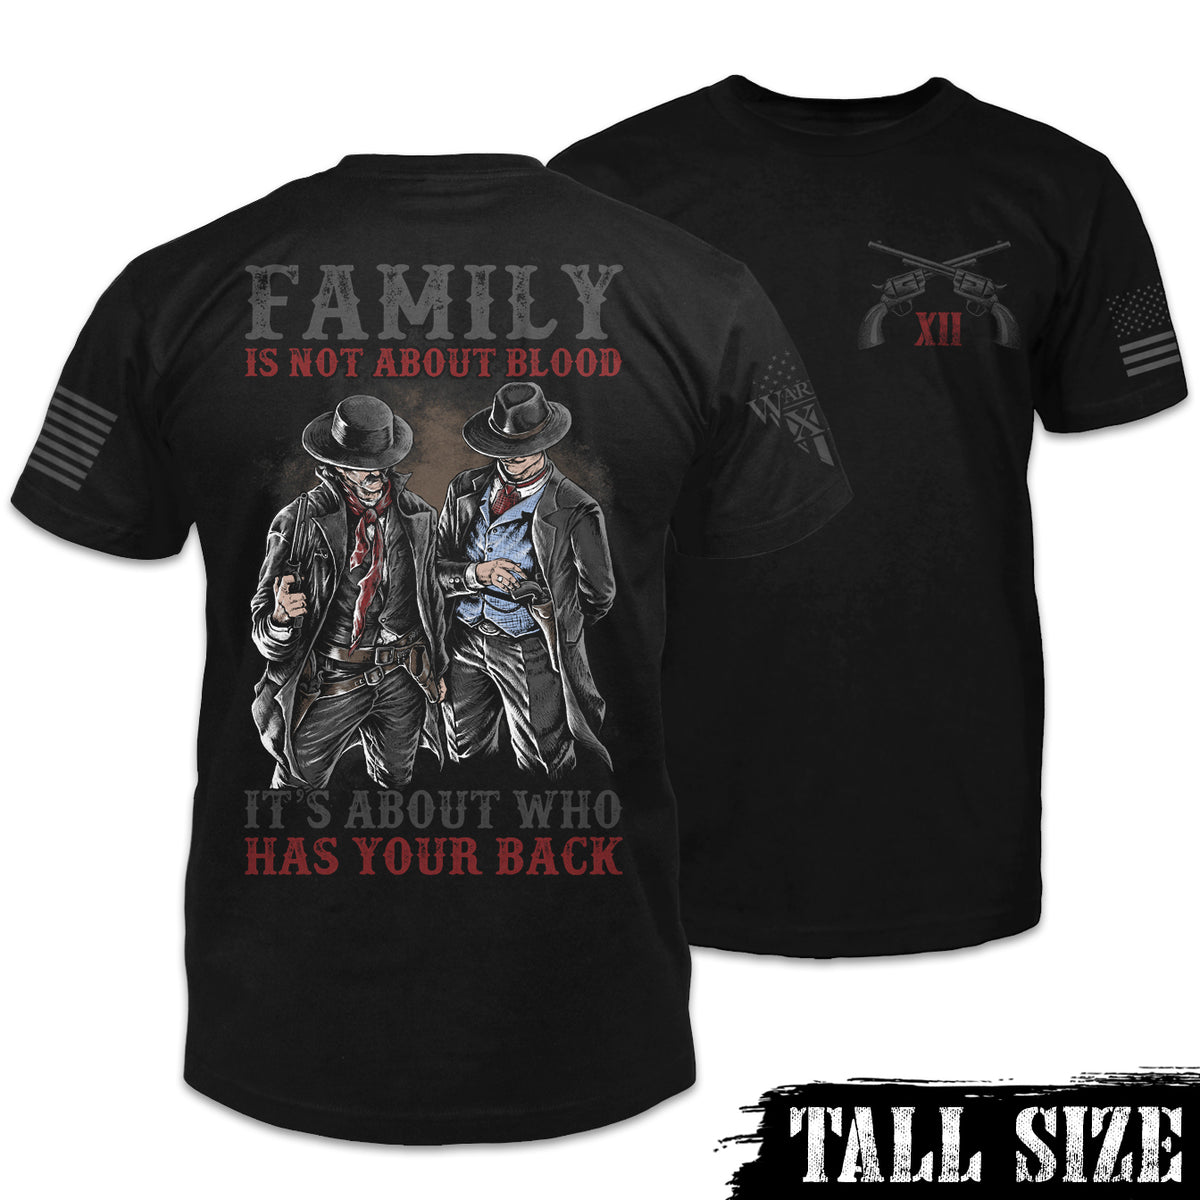 Front & back black tall size shirt with the words "Family is not about blood, it's about who has your back" with a two western cowboys printed on the shirt.